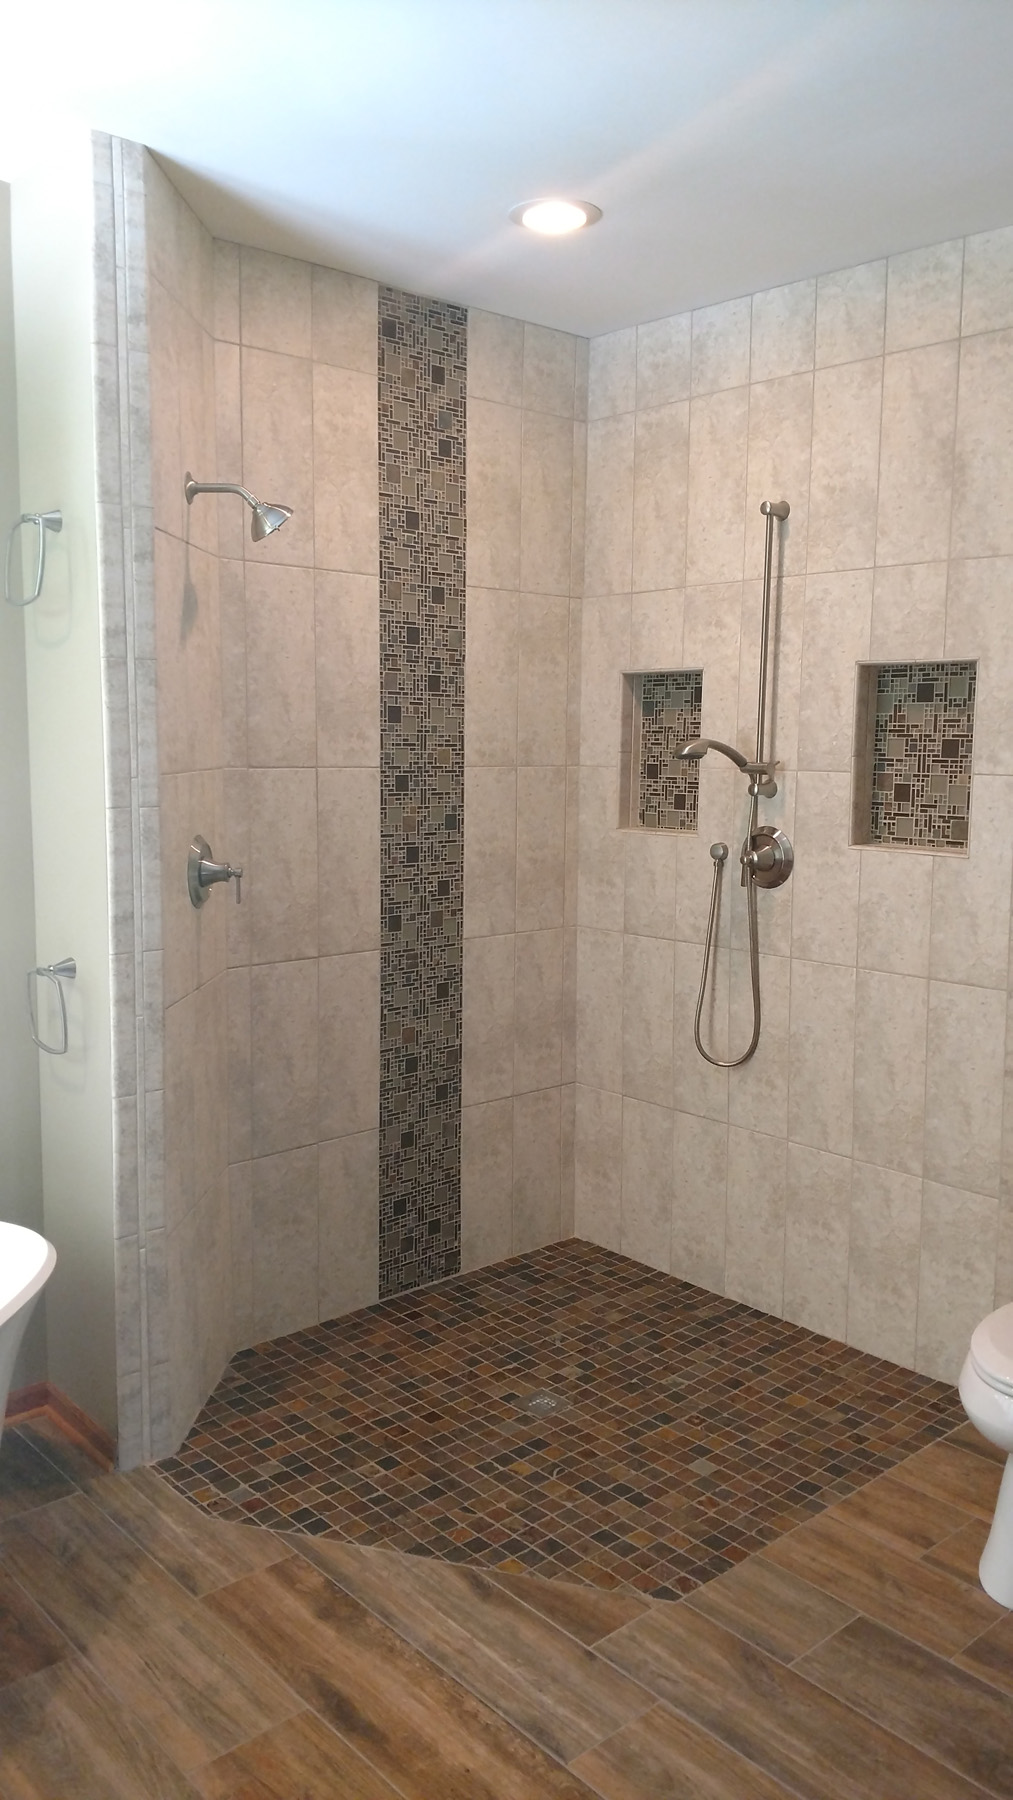 HUGE- Roll-in shower for aging in place